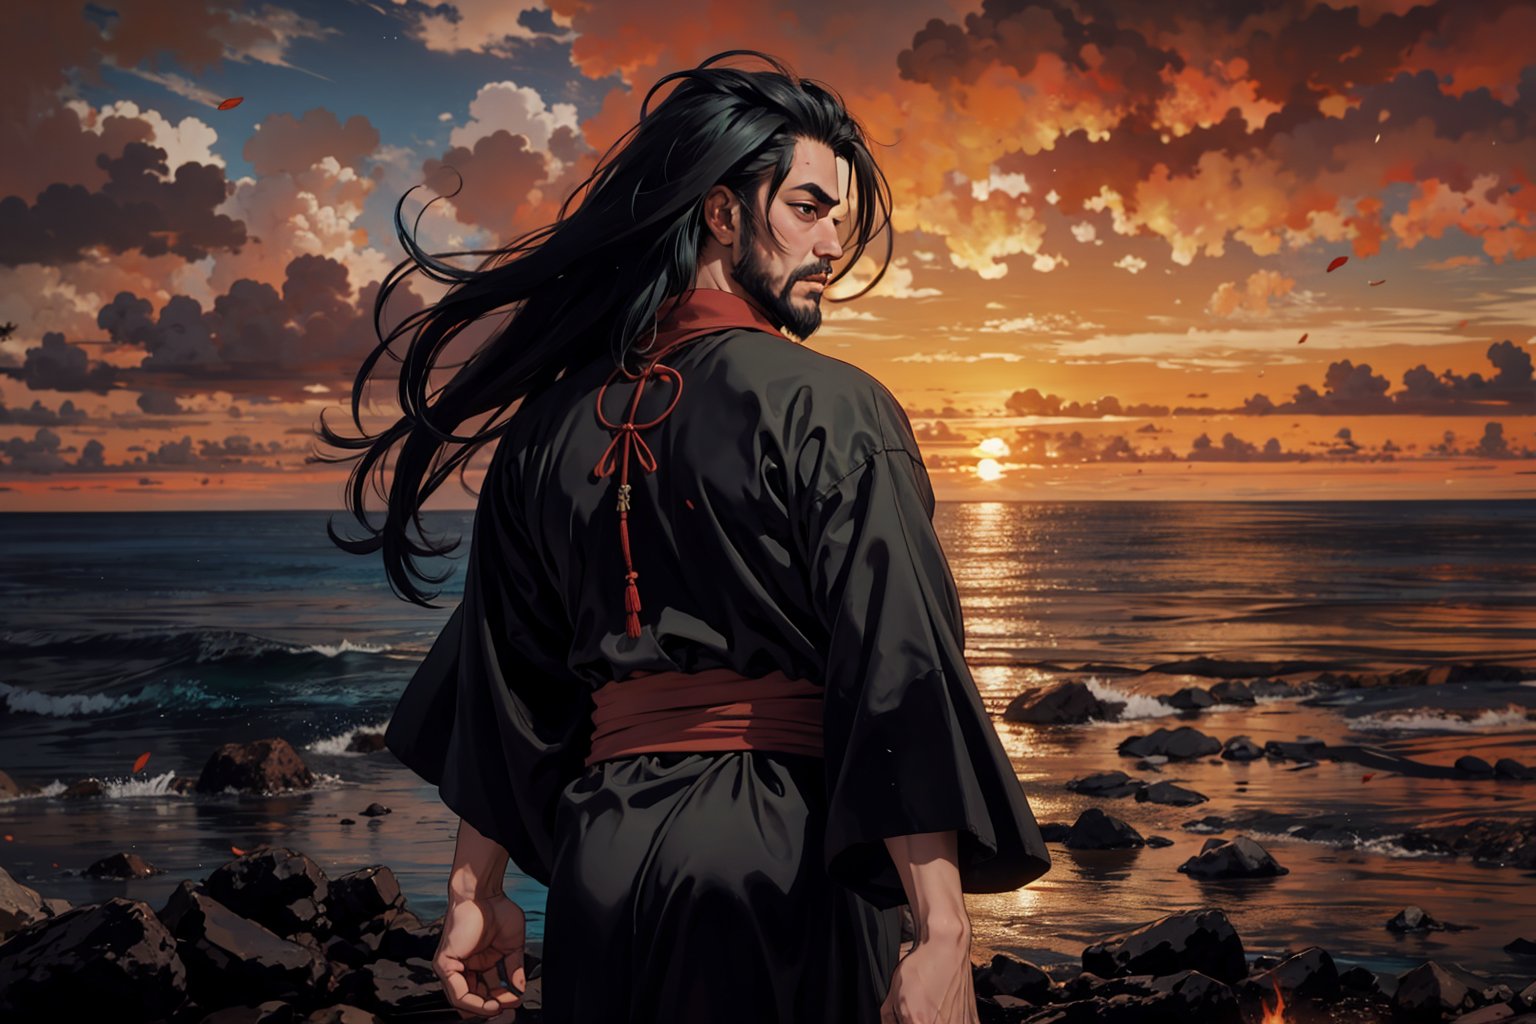 Chinese mythology story, solo, 1man, forty years old, long black hair, two beards, aqua Taoist robe, thin and tall, from behind, gazing out at a breathtaking sunset over a tranquil ocean, (accurate body and hand anatomy, four fingers and a thumb), boichi manga style